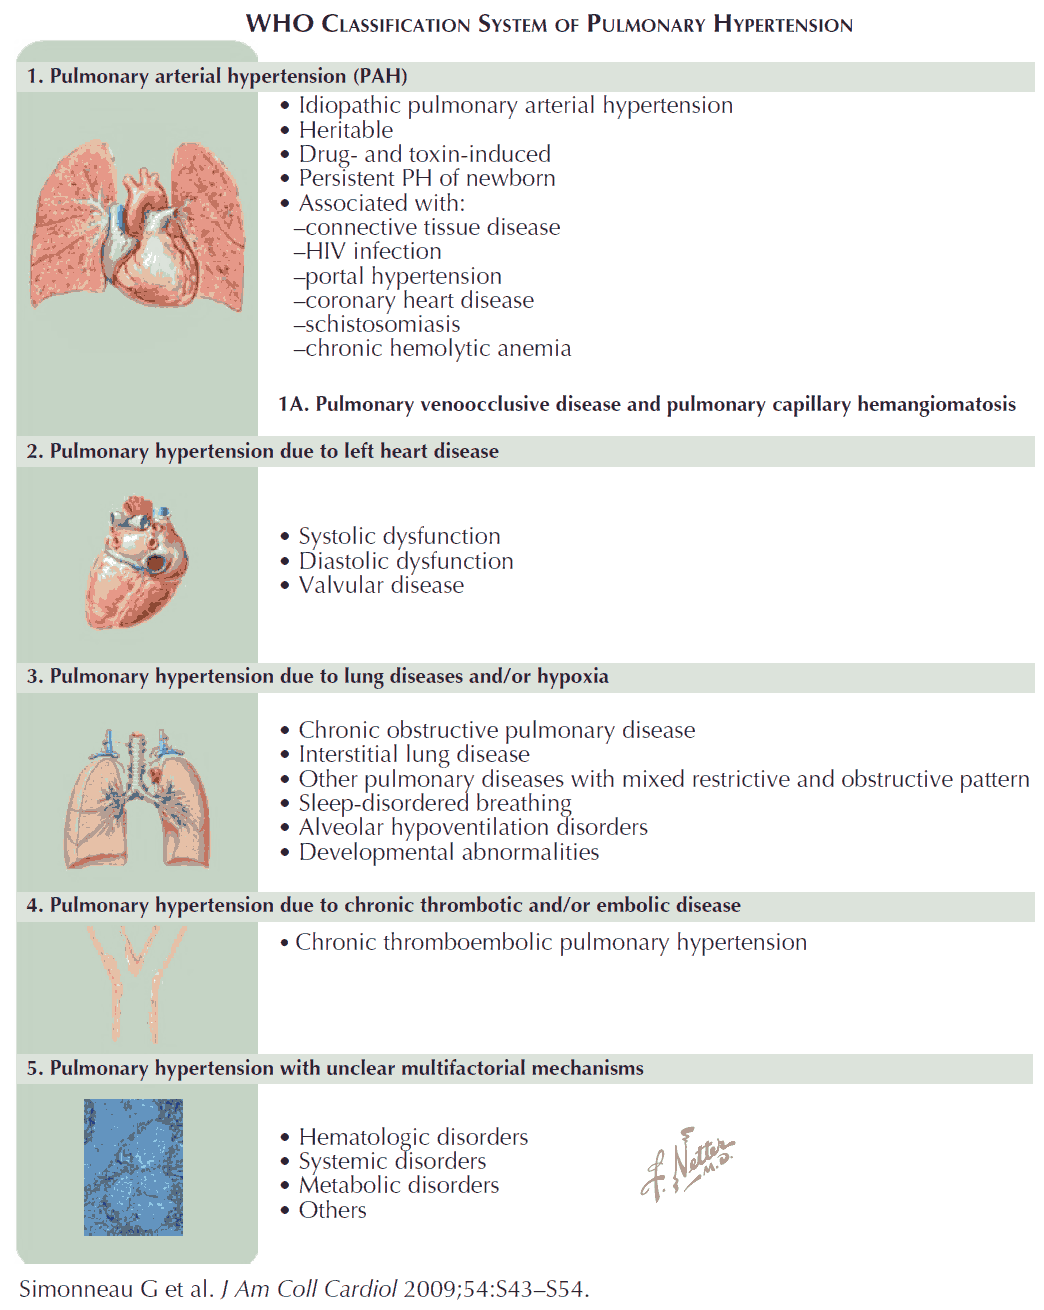 WHO Classification System of Pulmonary Hypertension